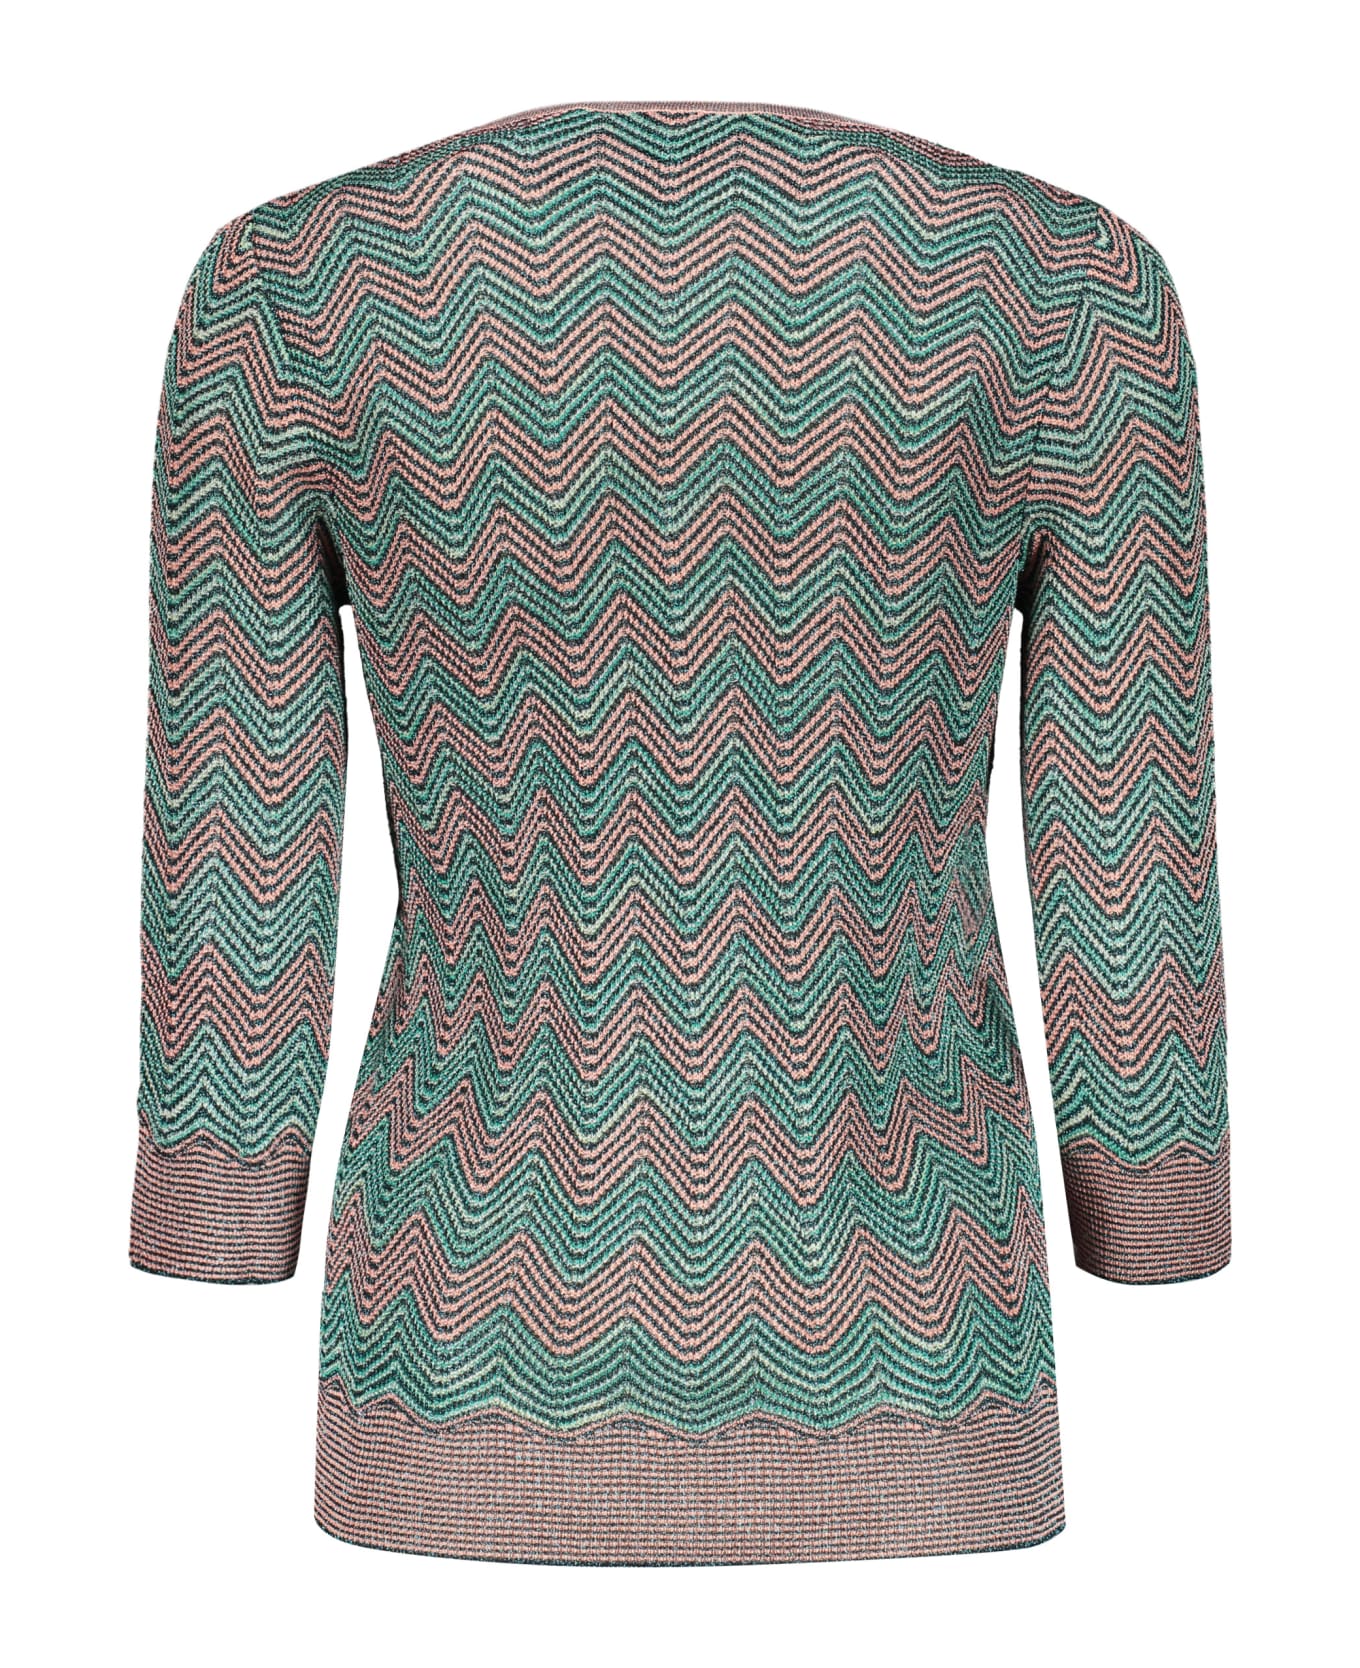 M Missoni Knitted Top - Multicolor